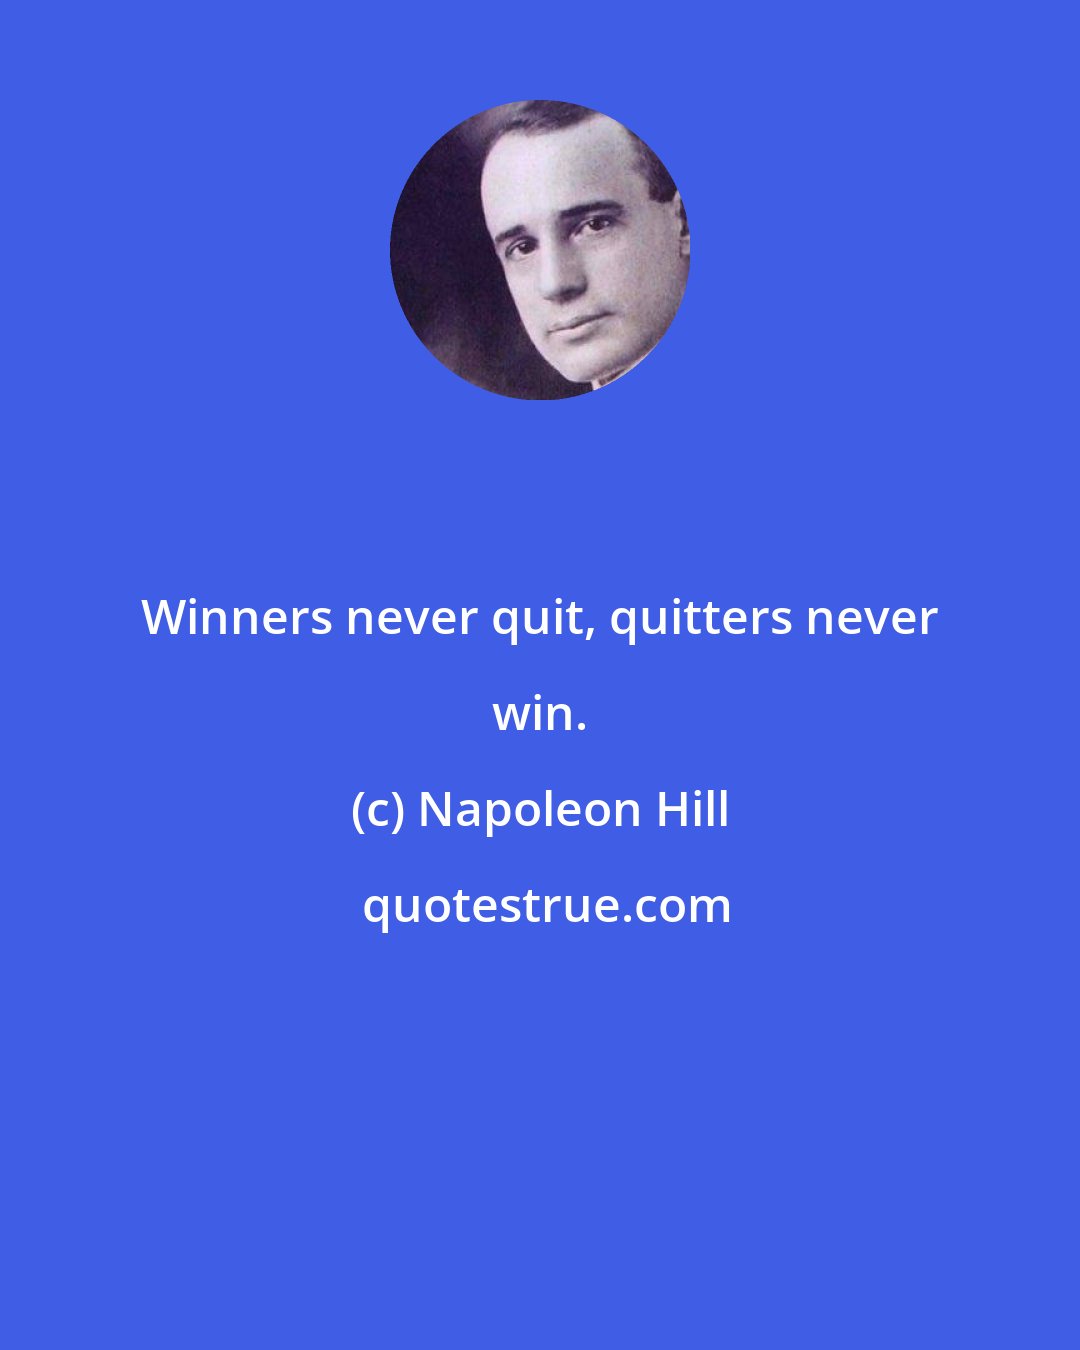 Napoleon Hill: Winners never quit, quitters never win.